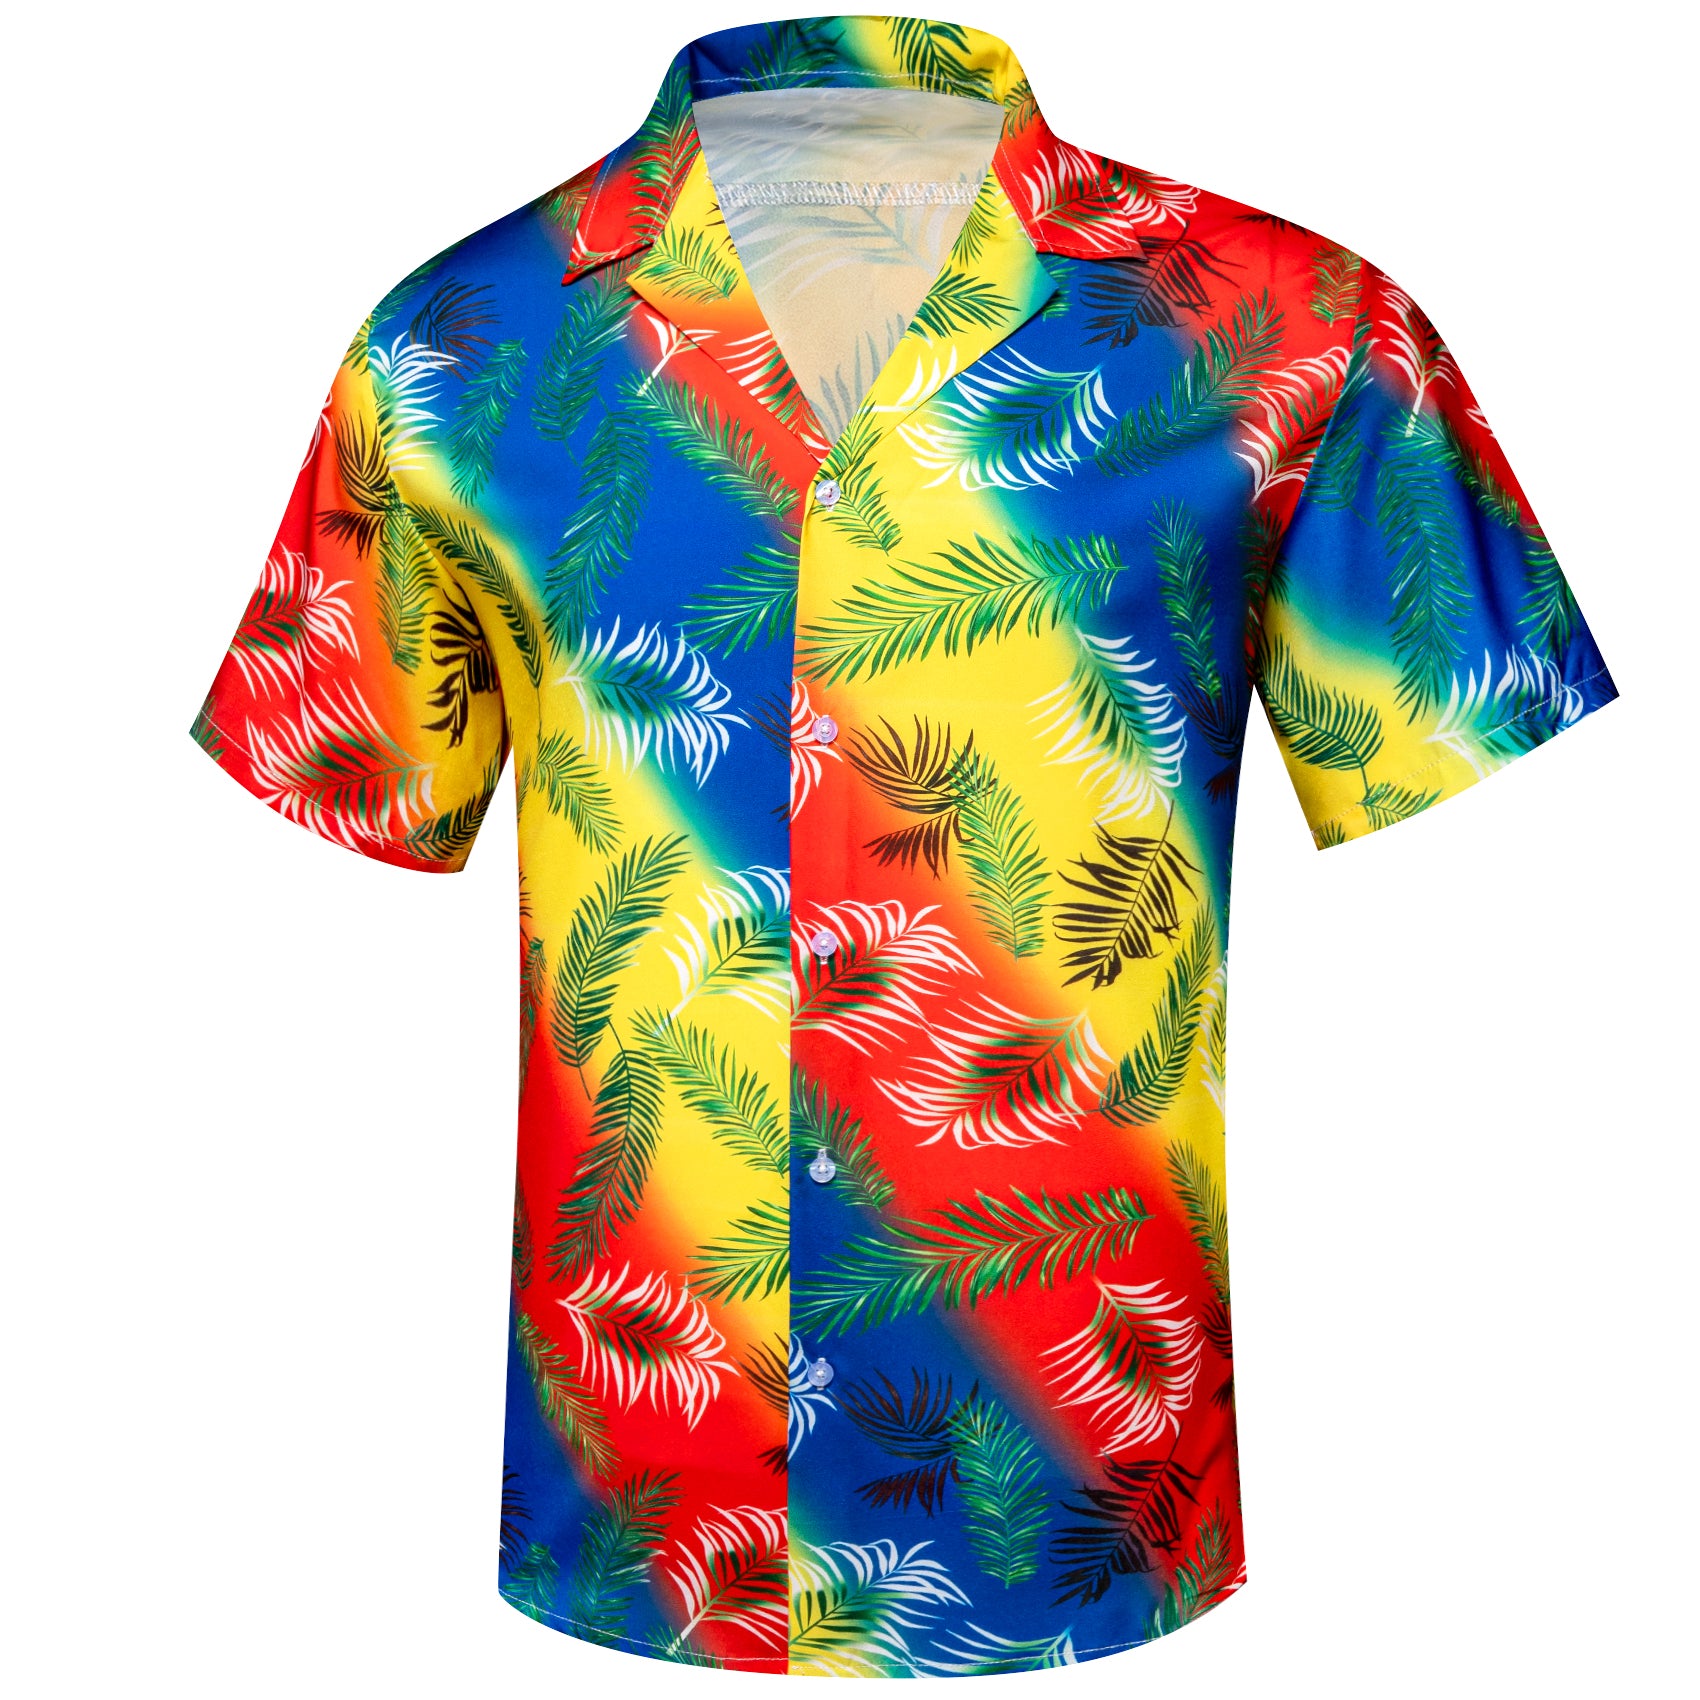 Men's Yellow Red Feather Floral Pattern Short Sleeves Summer Hawaii Shirt